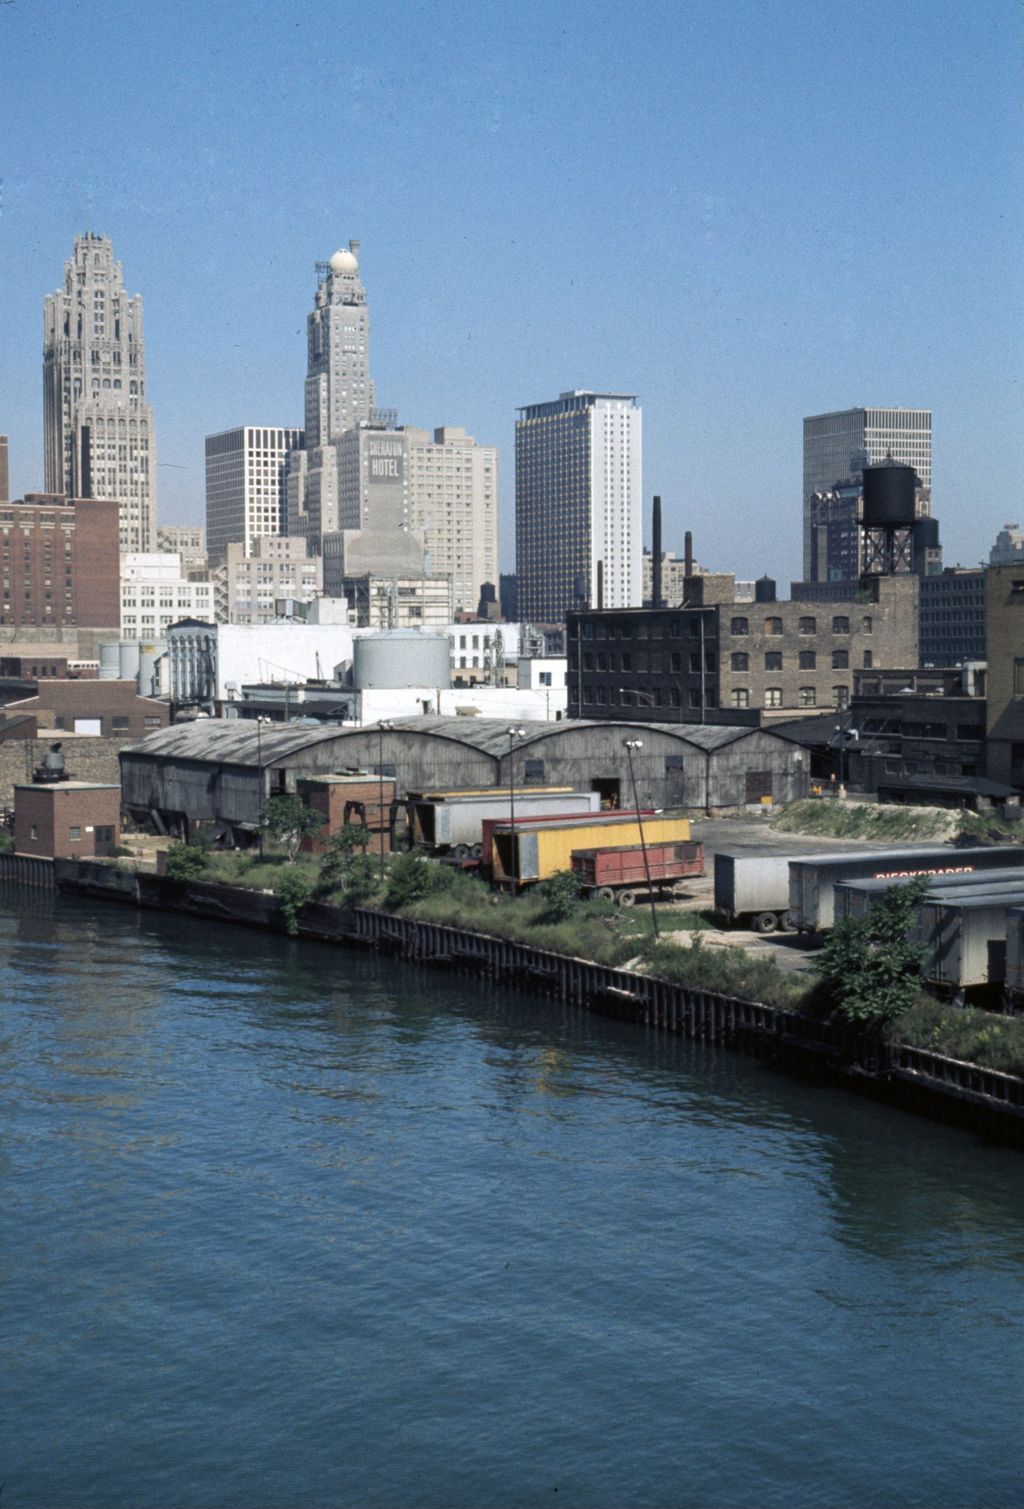 Storage facilities along the Chicago River